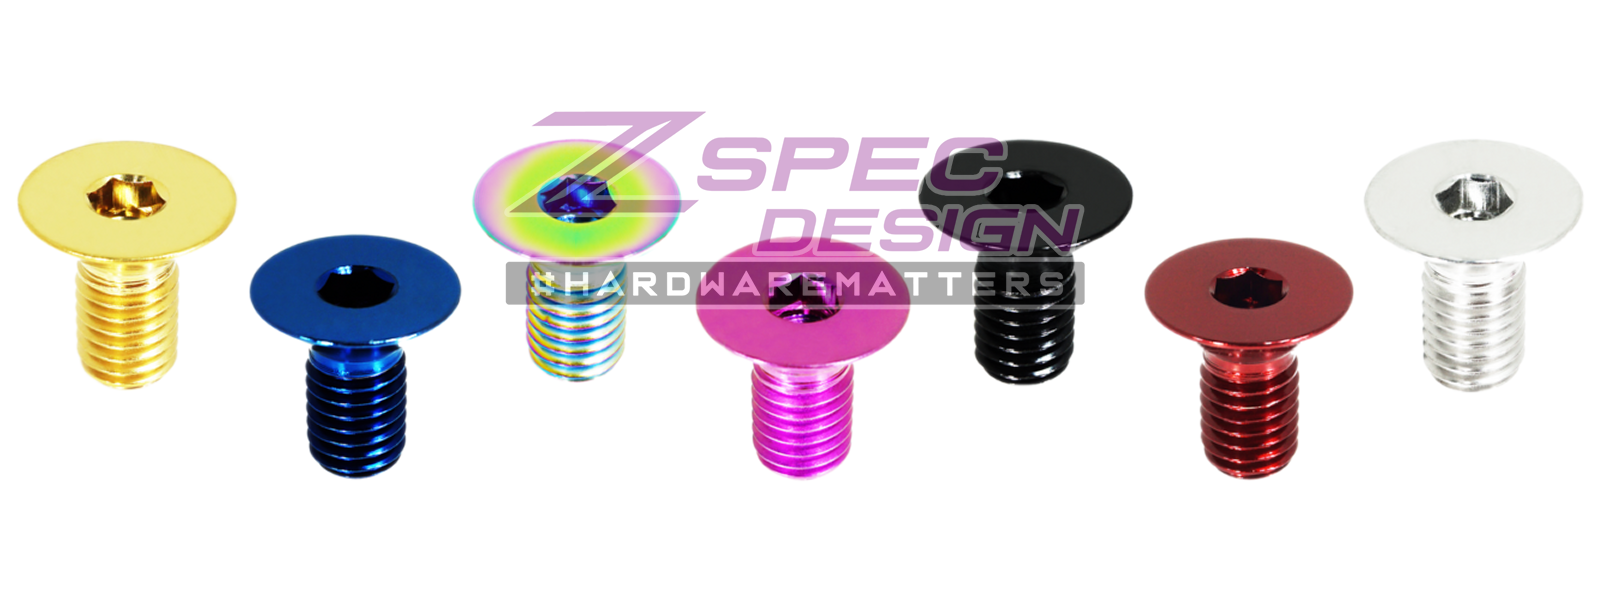 ZSPEC Design - Dress Up Bolts Hardware Fasteners Nuts Washers and More - since 2008.  Automotive, Motorcyles, Go-Karts, Medical, Hobby & Craft uses.